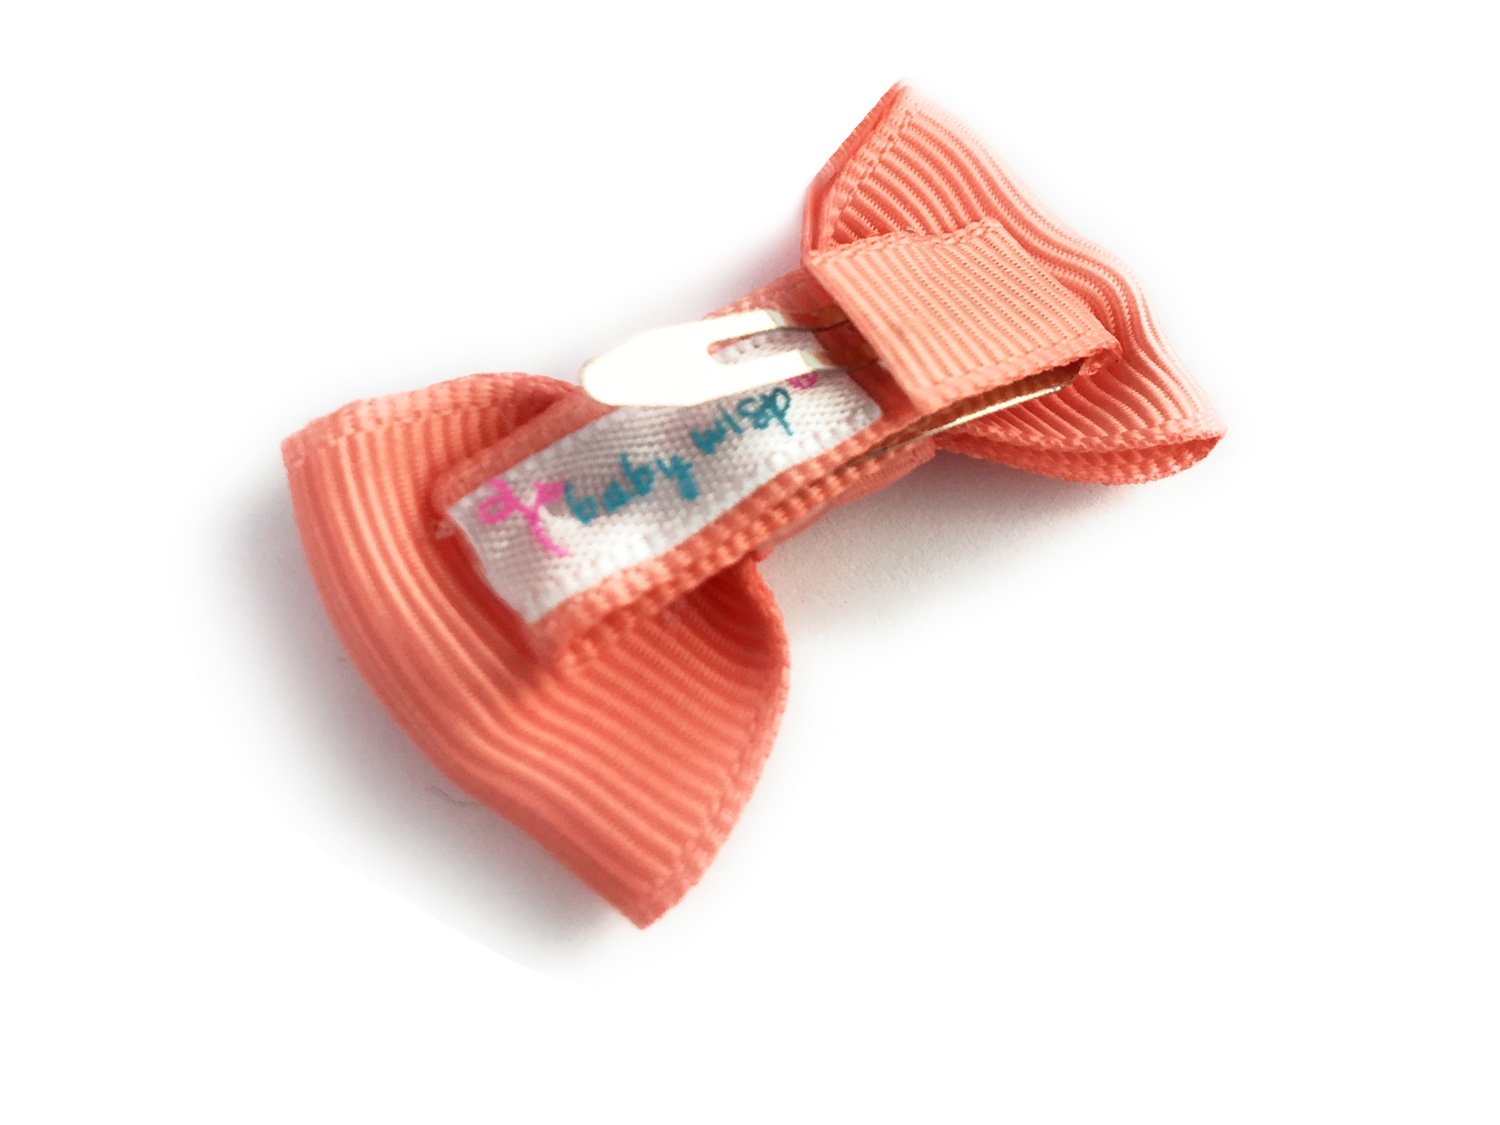 Small Snap Charlotte Bow - Single Hair Bow - Tulip Pink Baby Wisp